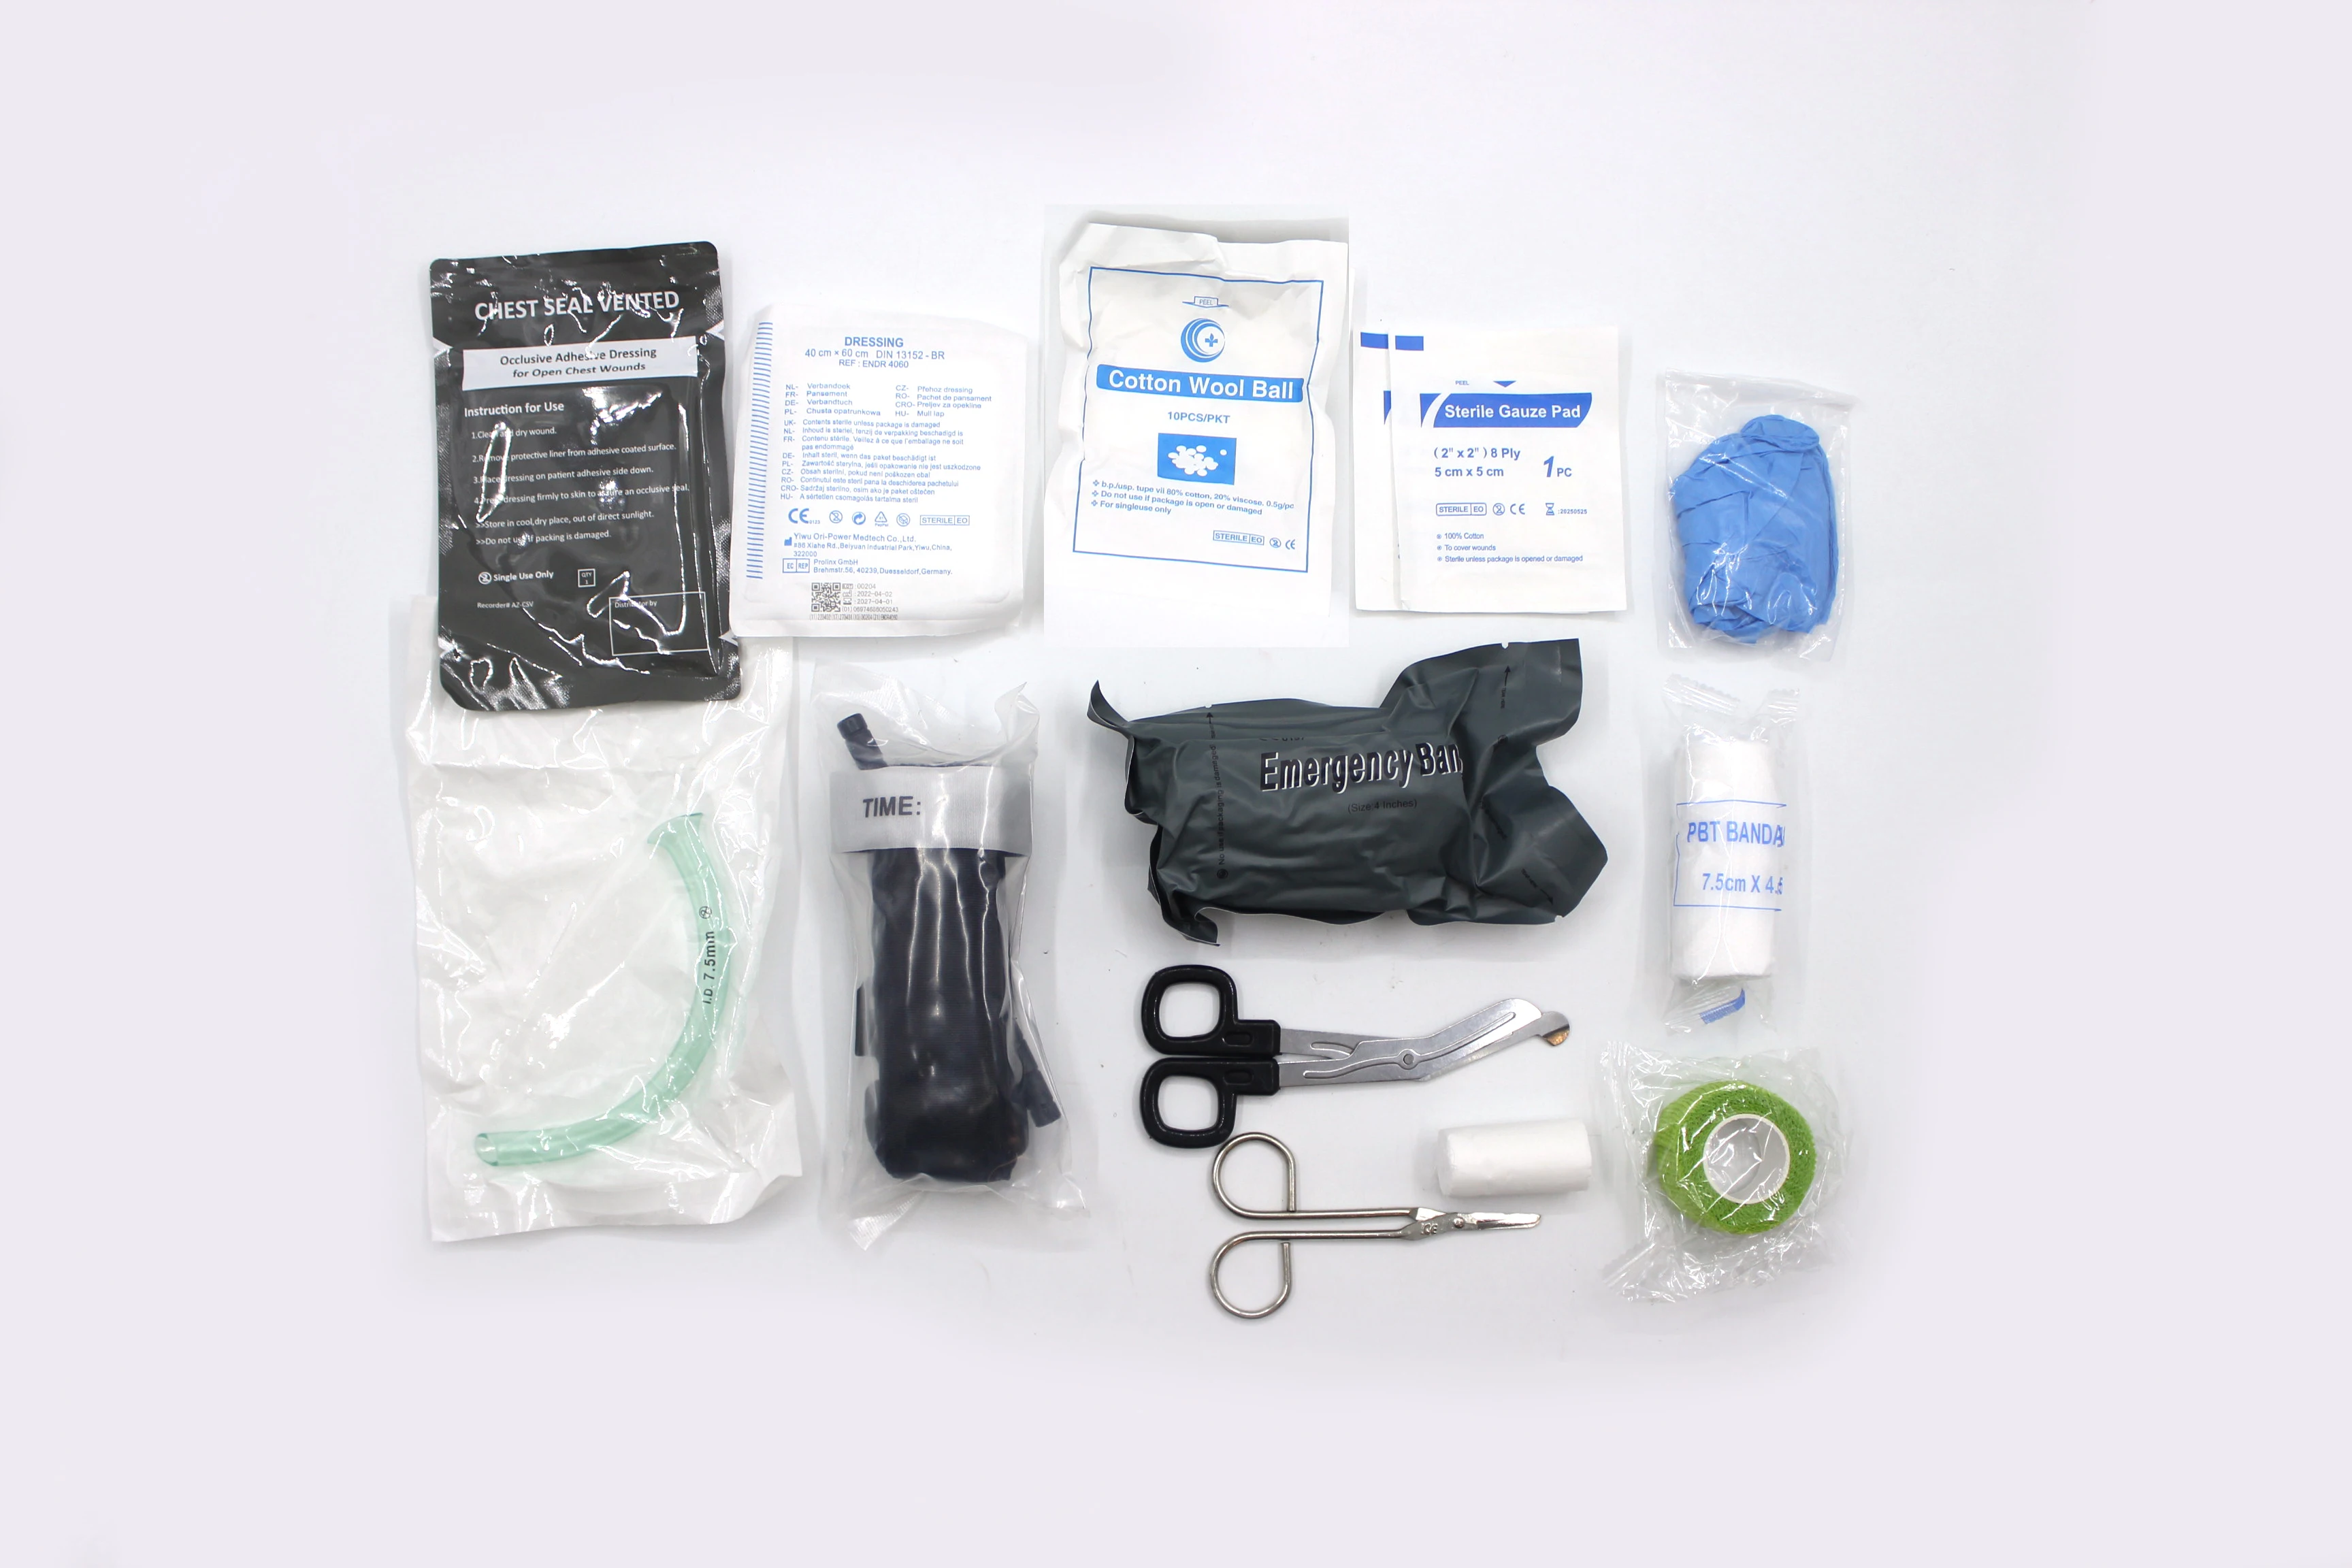 JY First Aid Kit Eva Emergency Medical Tactical Trauma Outdoor Camping Hiking Portable First Aid Kit Bag